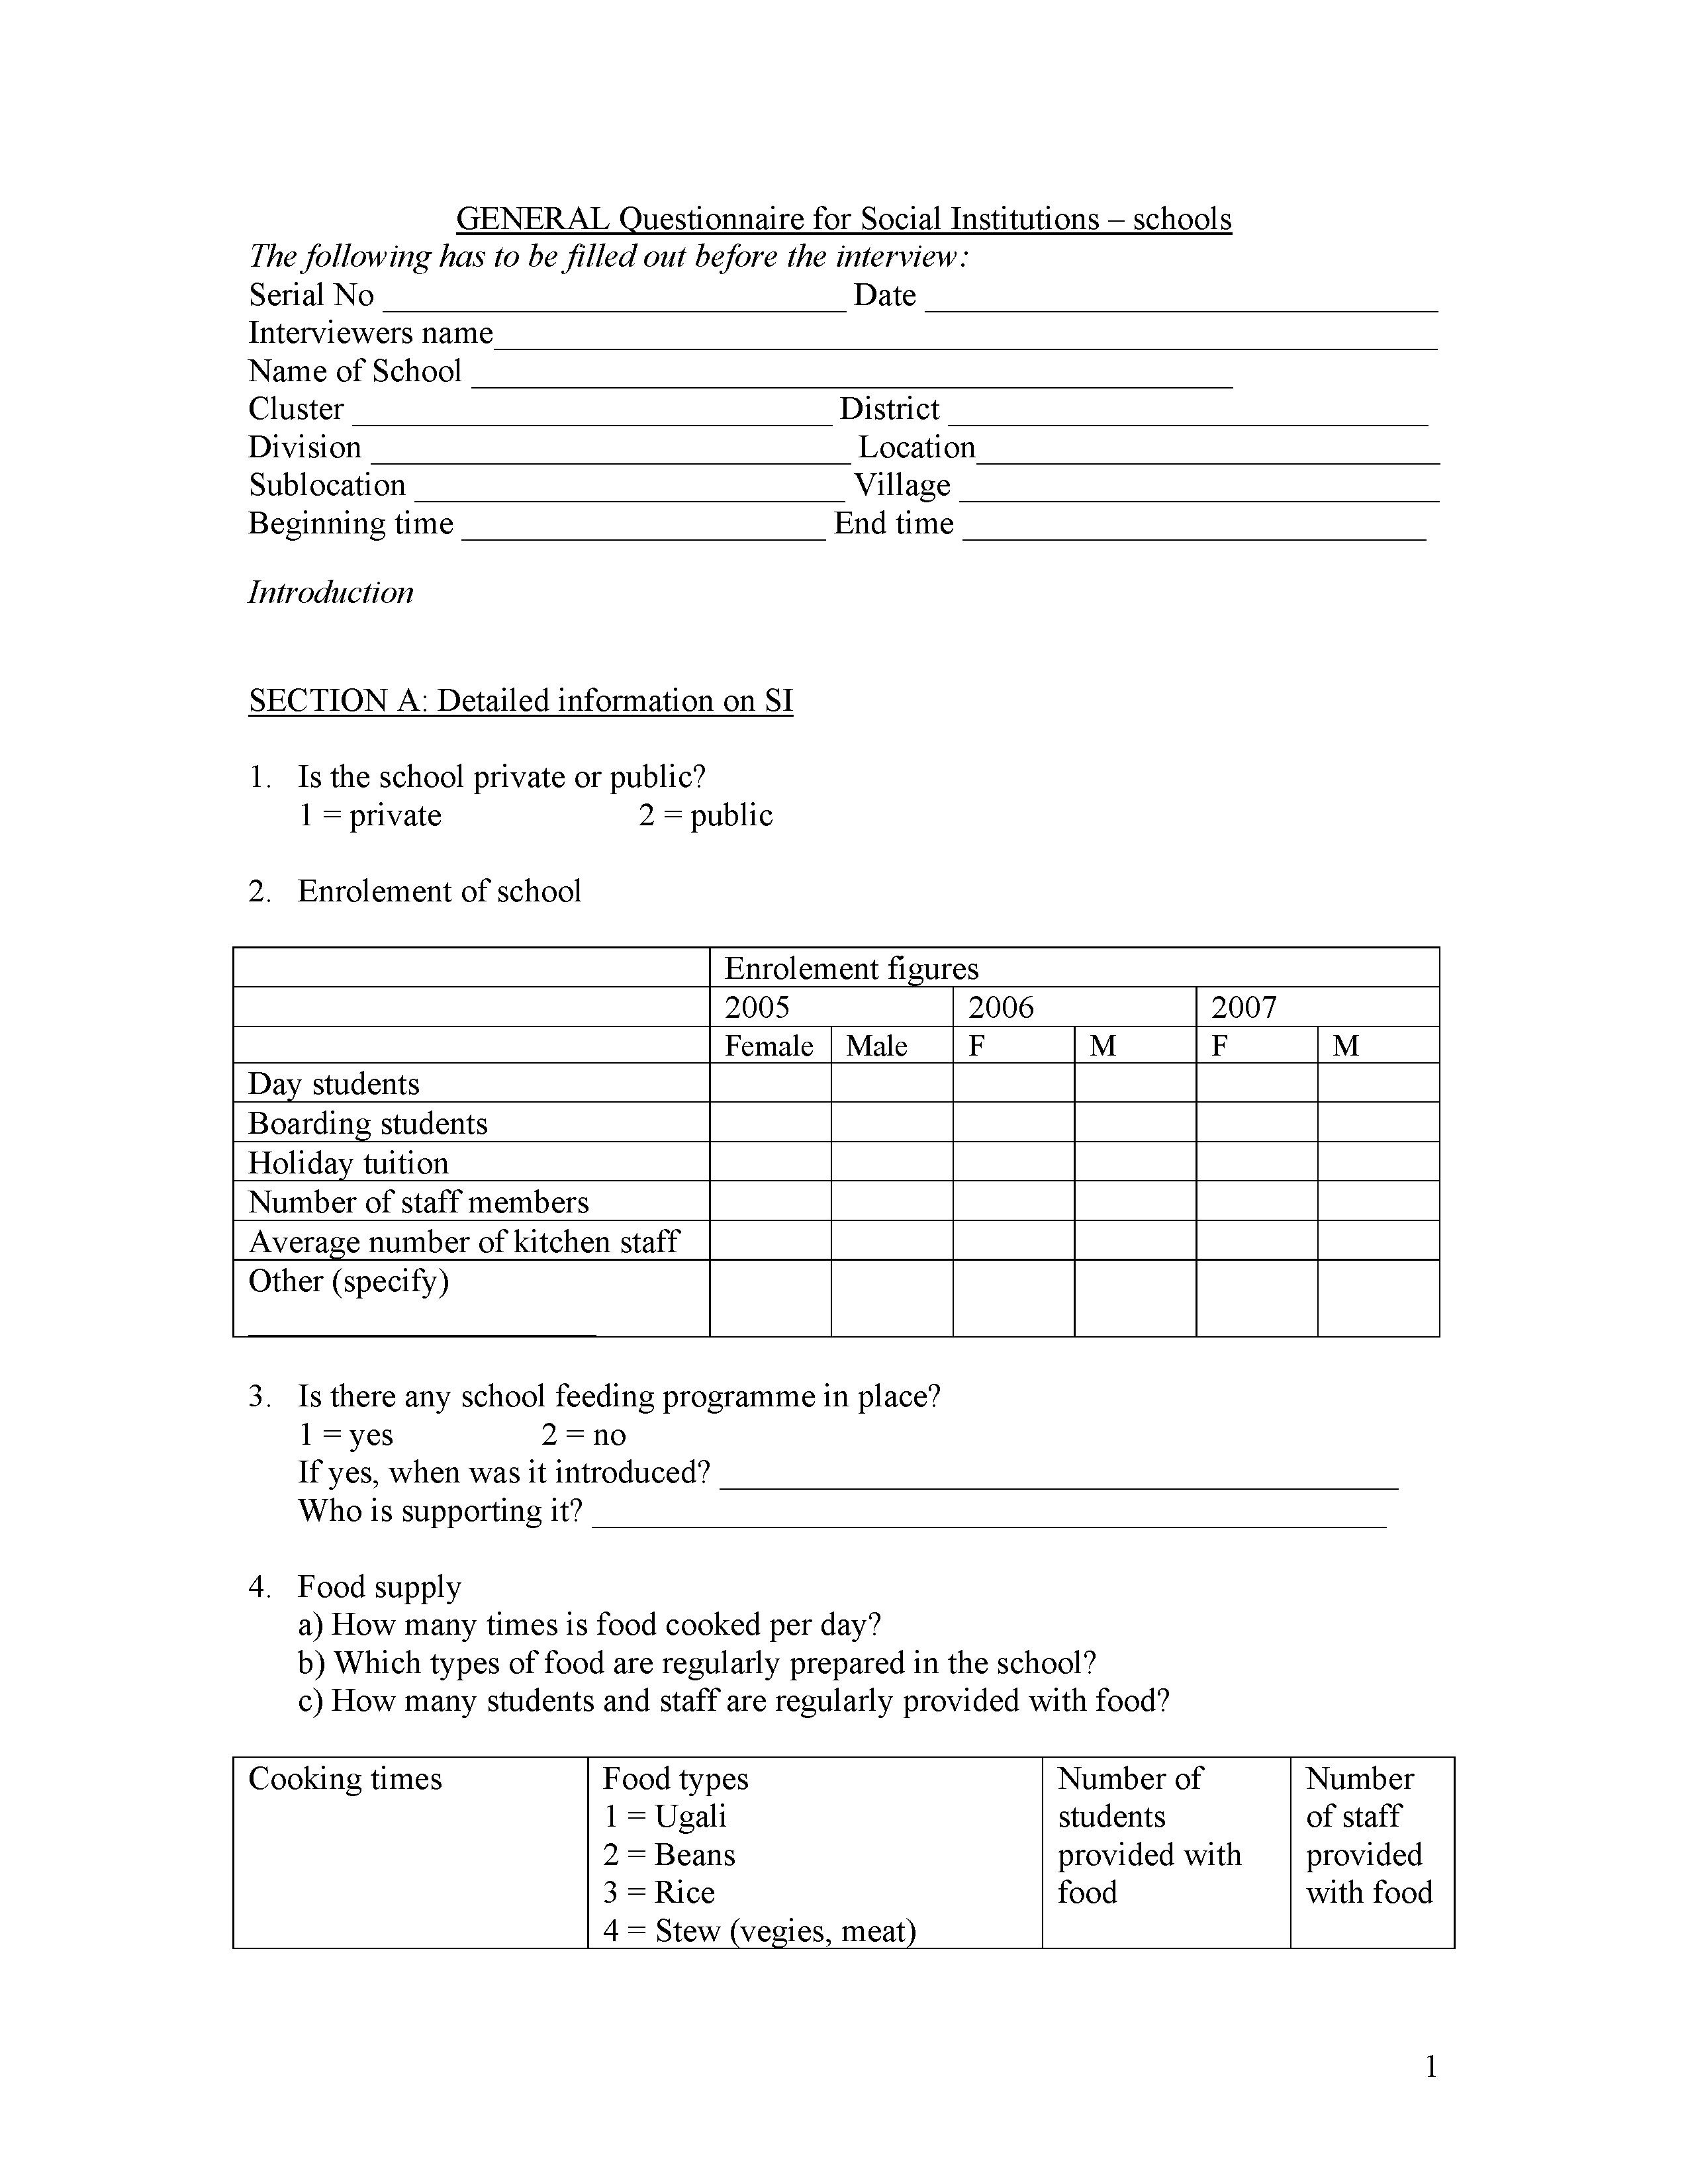 File:Questionnaire for Social Institutions in Kenya.pdf